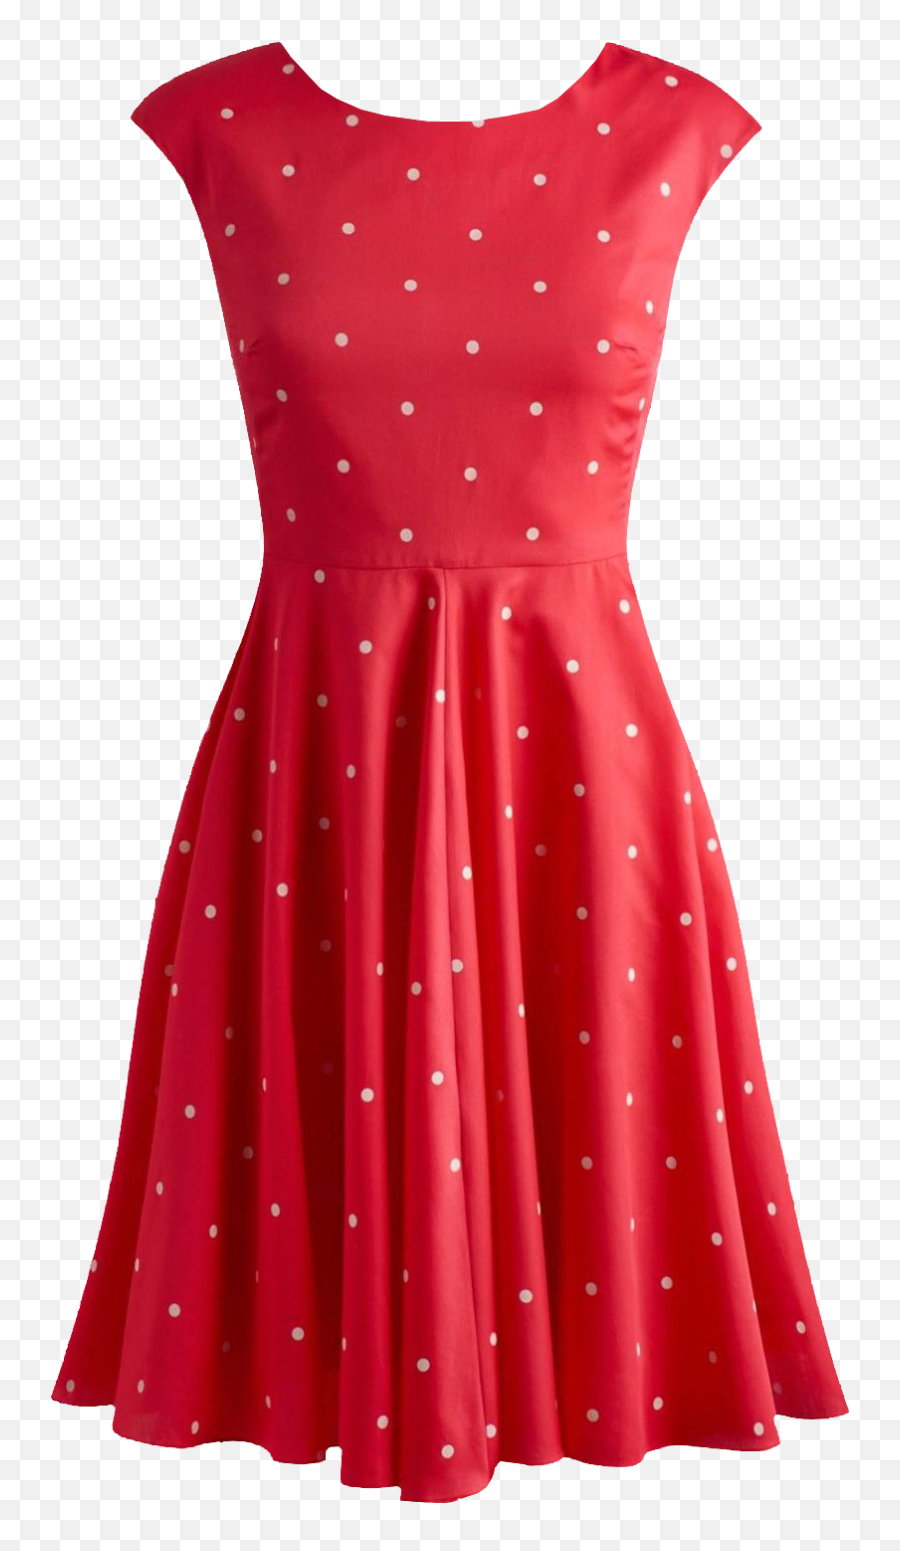 Fifties Style Red Dress Transparent - Clothes Transparent Background ...